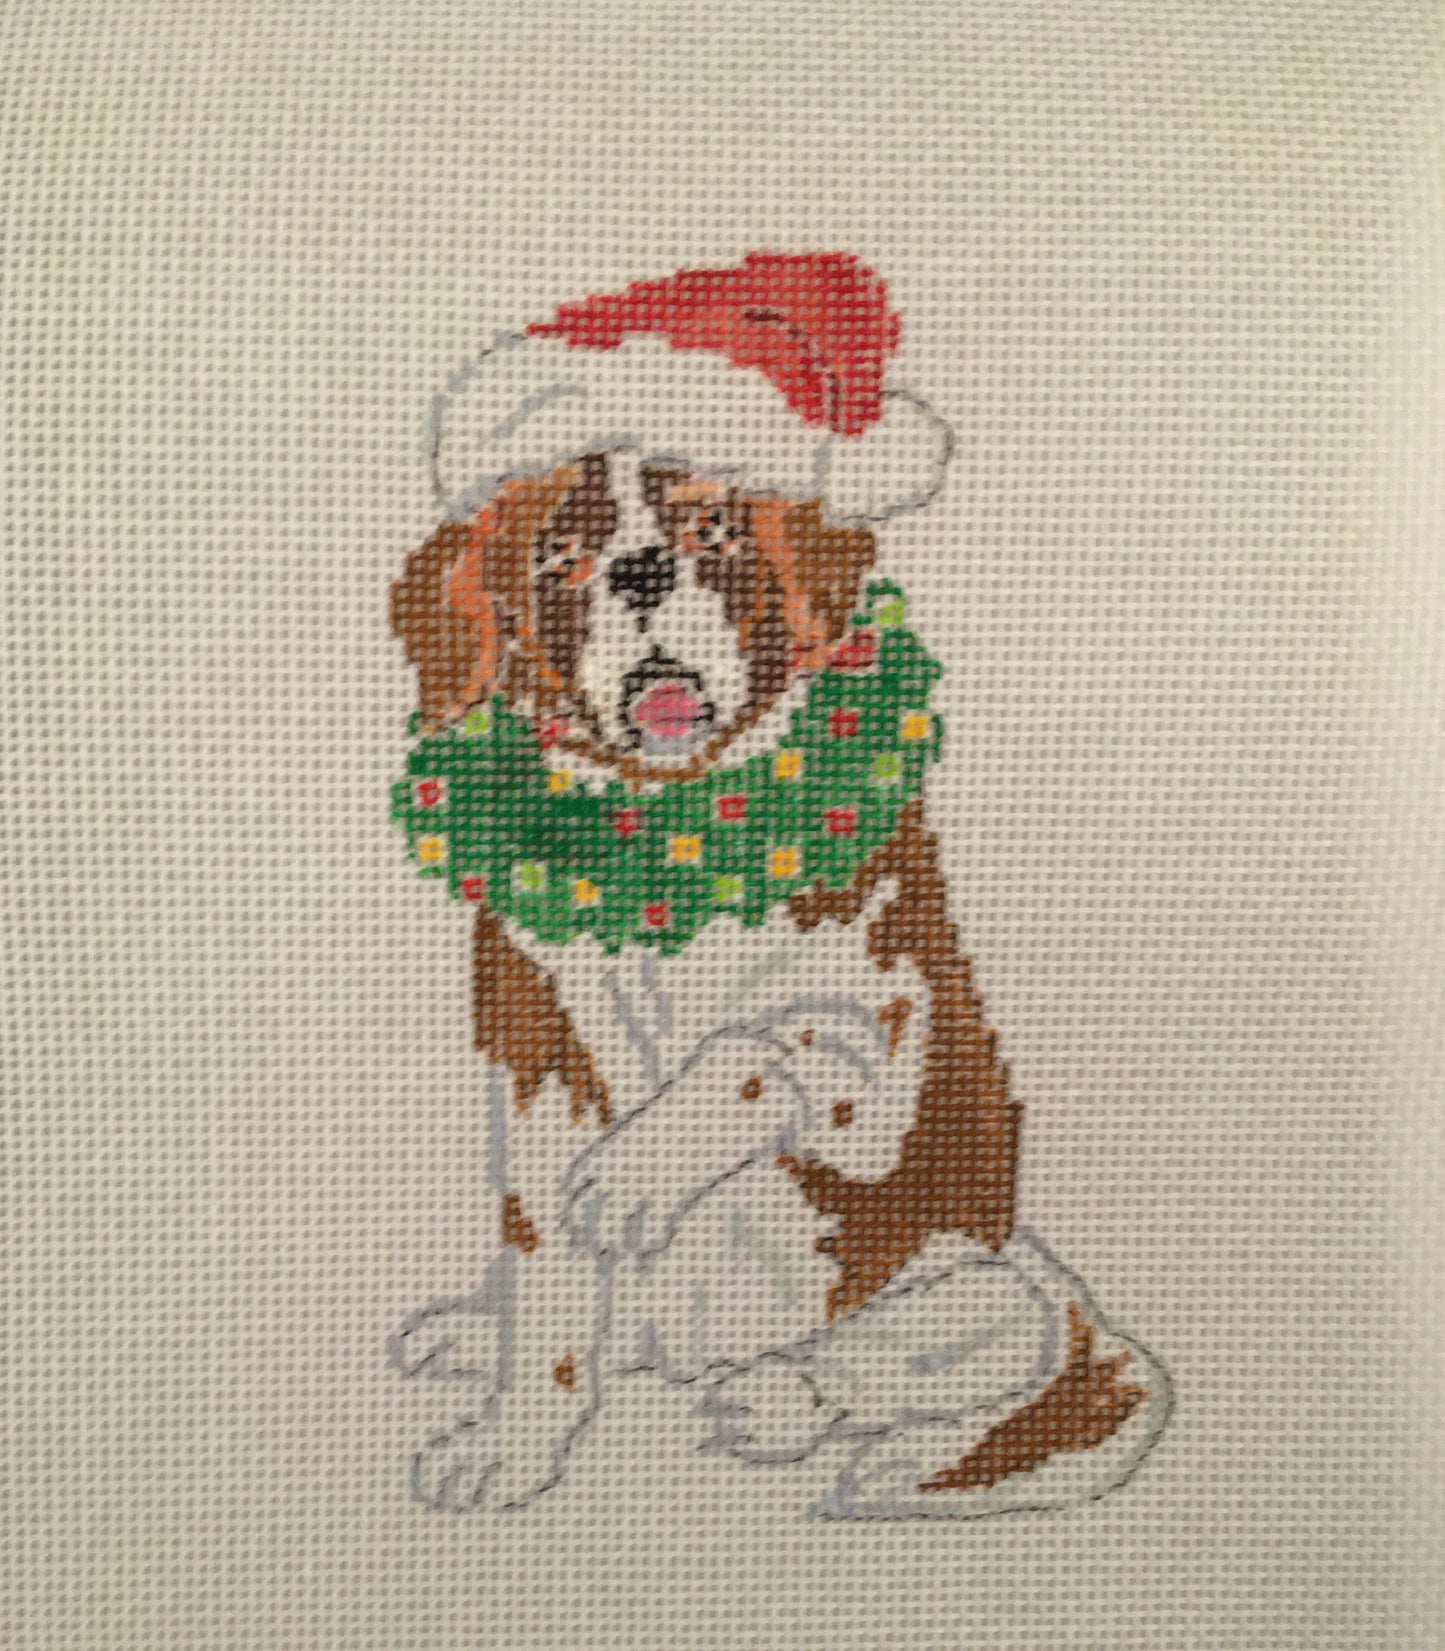 #12 December dog with stitch guide